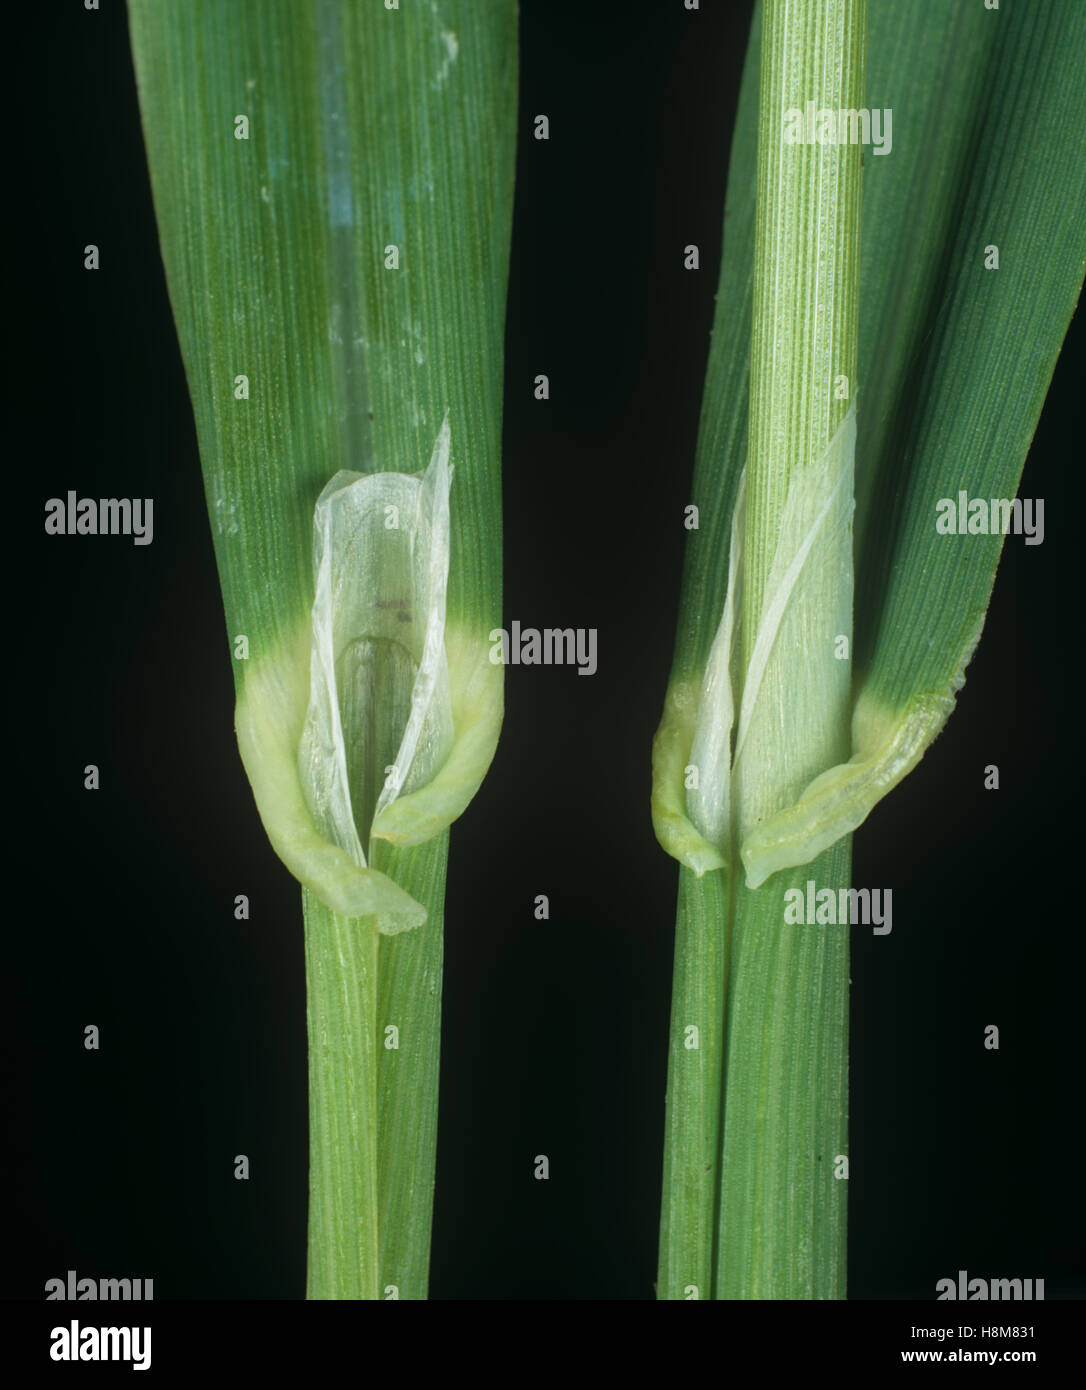 Awned canary-grass, Phalaris paradoxa, leaf ligule at the node and leafstalk of an agricultural grass weed Stock Photo